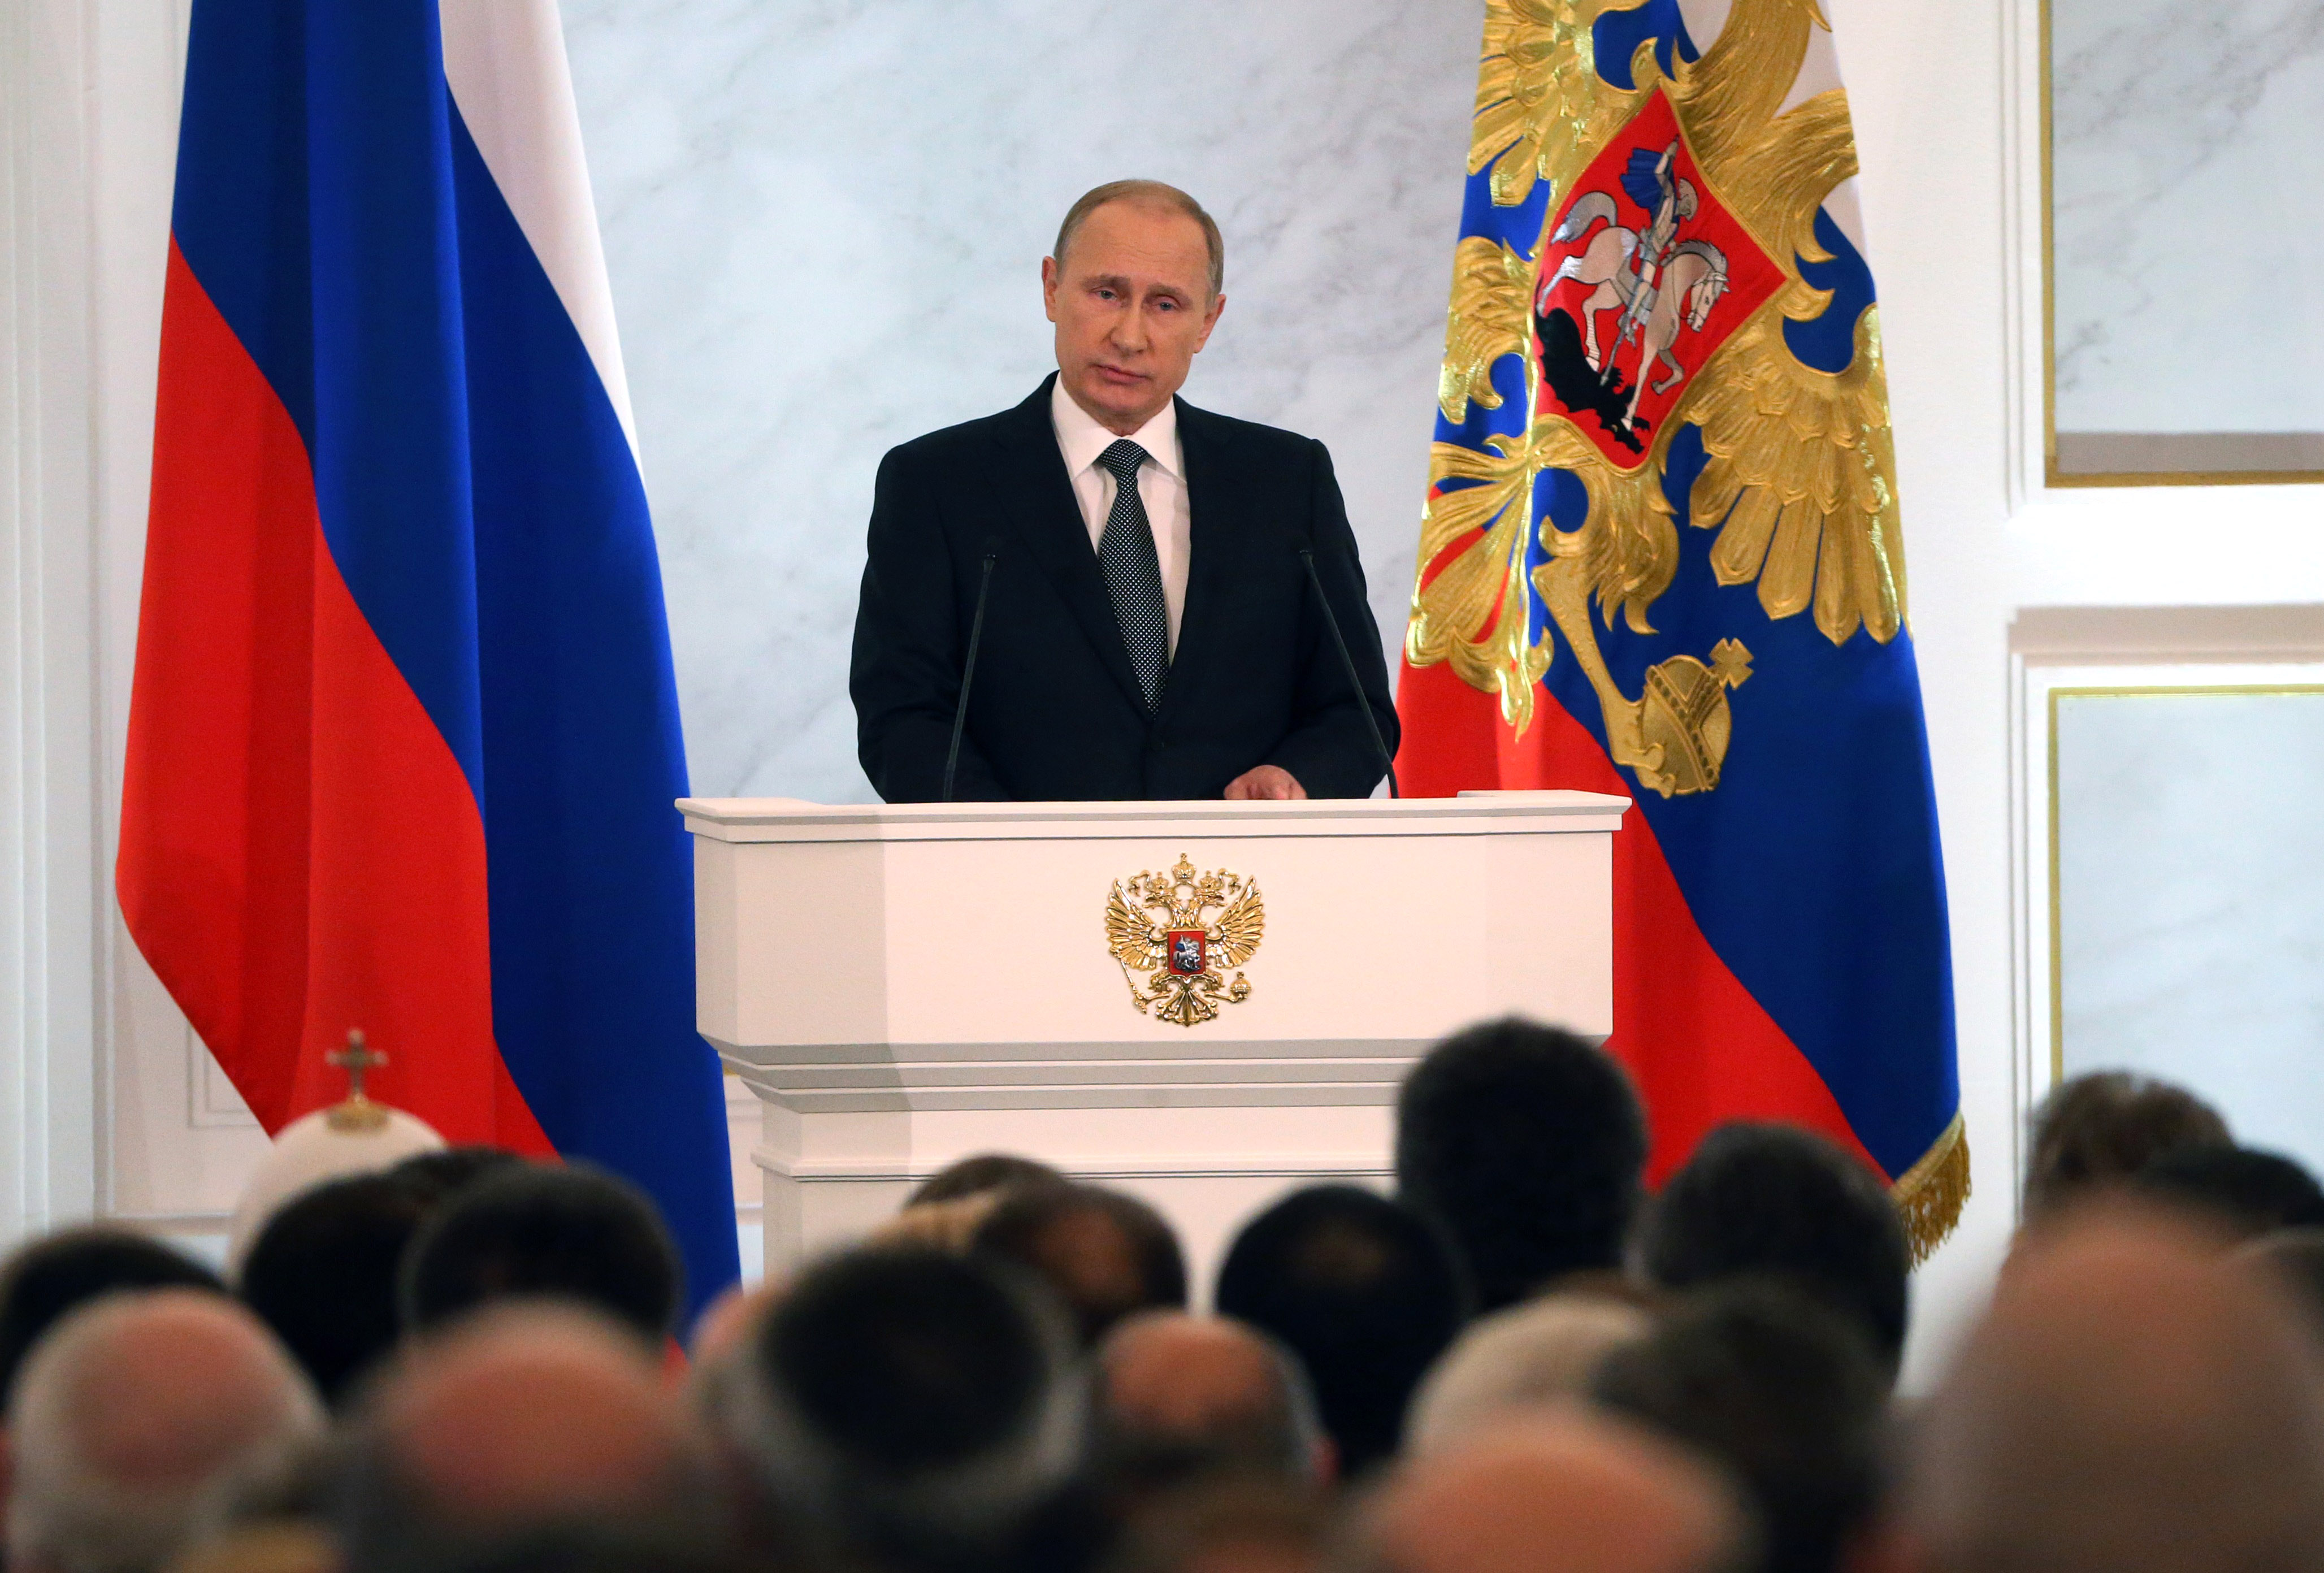 Russian President Vladimir Putin delivers his annual state of the nation address to the National Assembly in Grand Kremlin Palace on in Moscow on Dec. 4, 2014. (Sasha Mordovets—Getty Images)